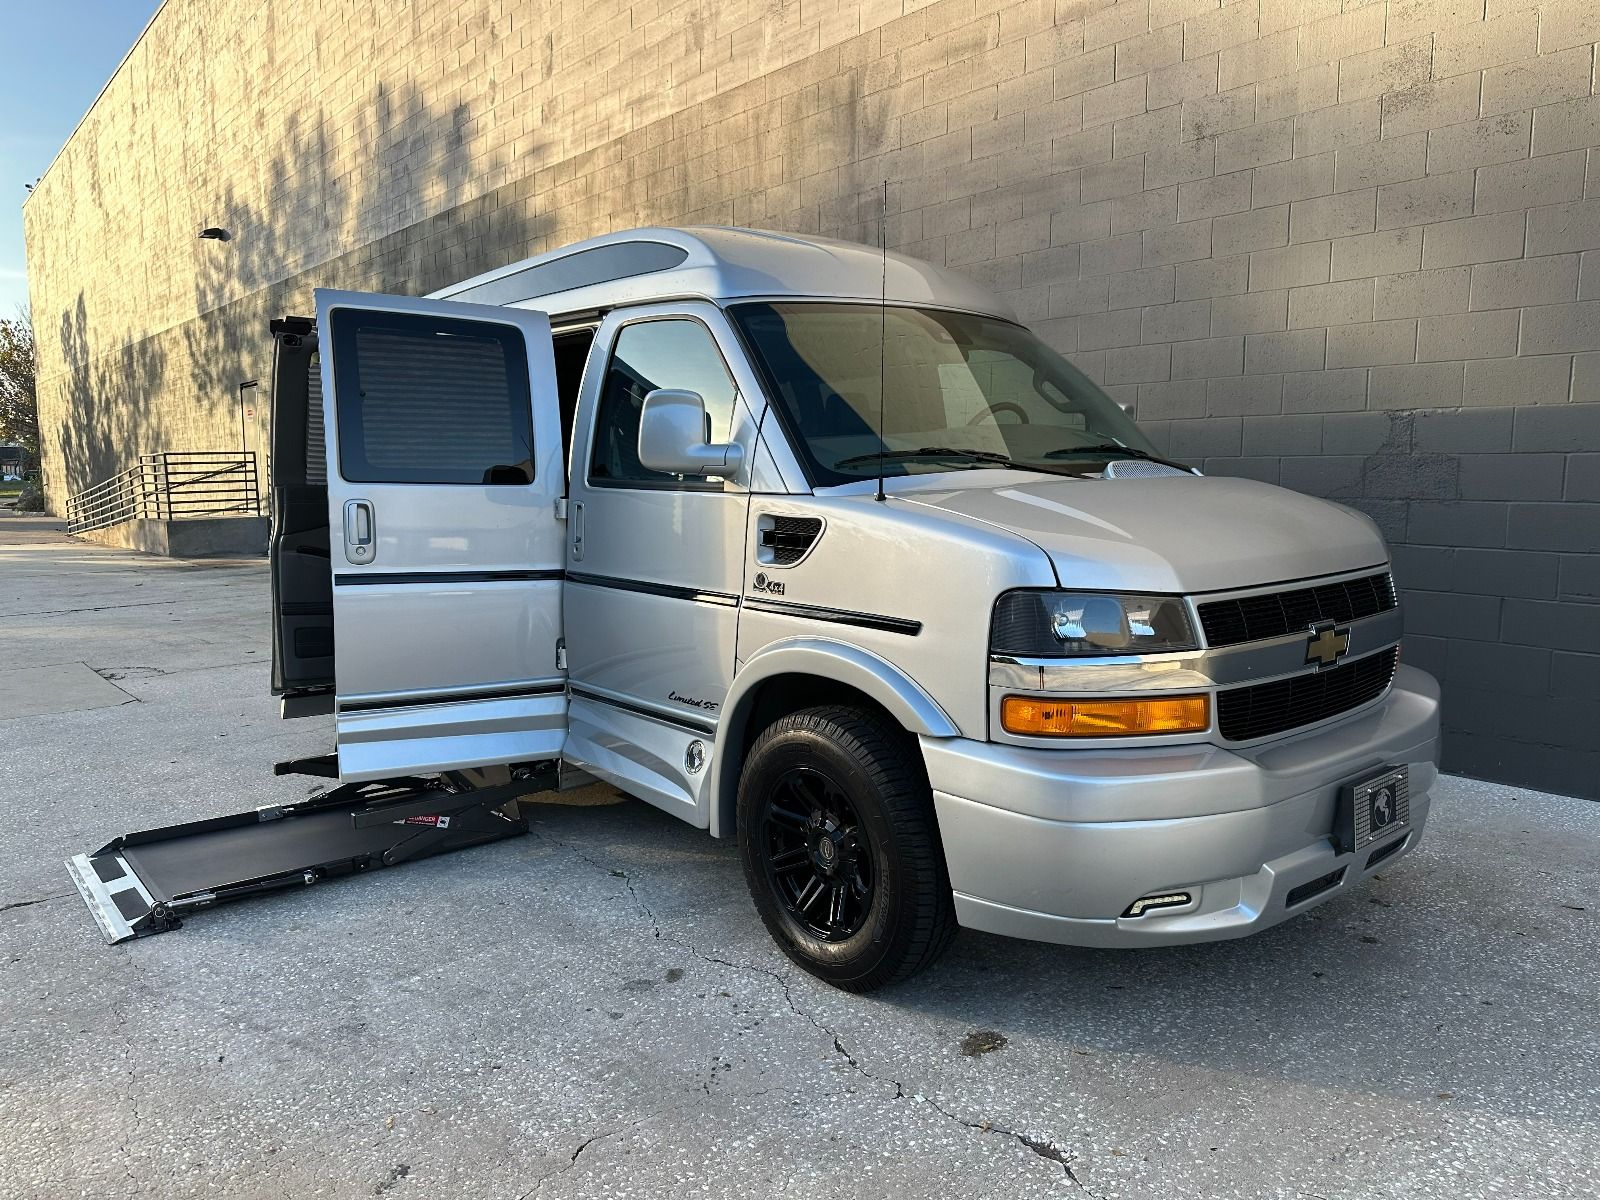 Chevrolet Express Full Size Wheelchair Van with lift system deployed from passenger side barn style doors, as seen from front angle.